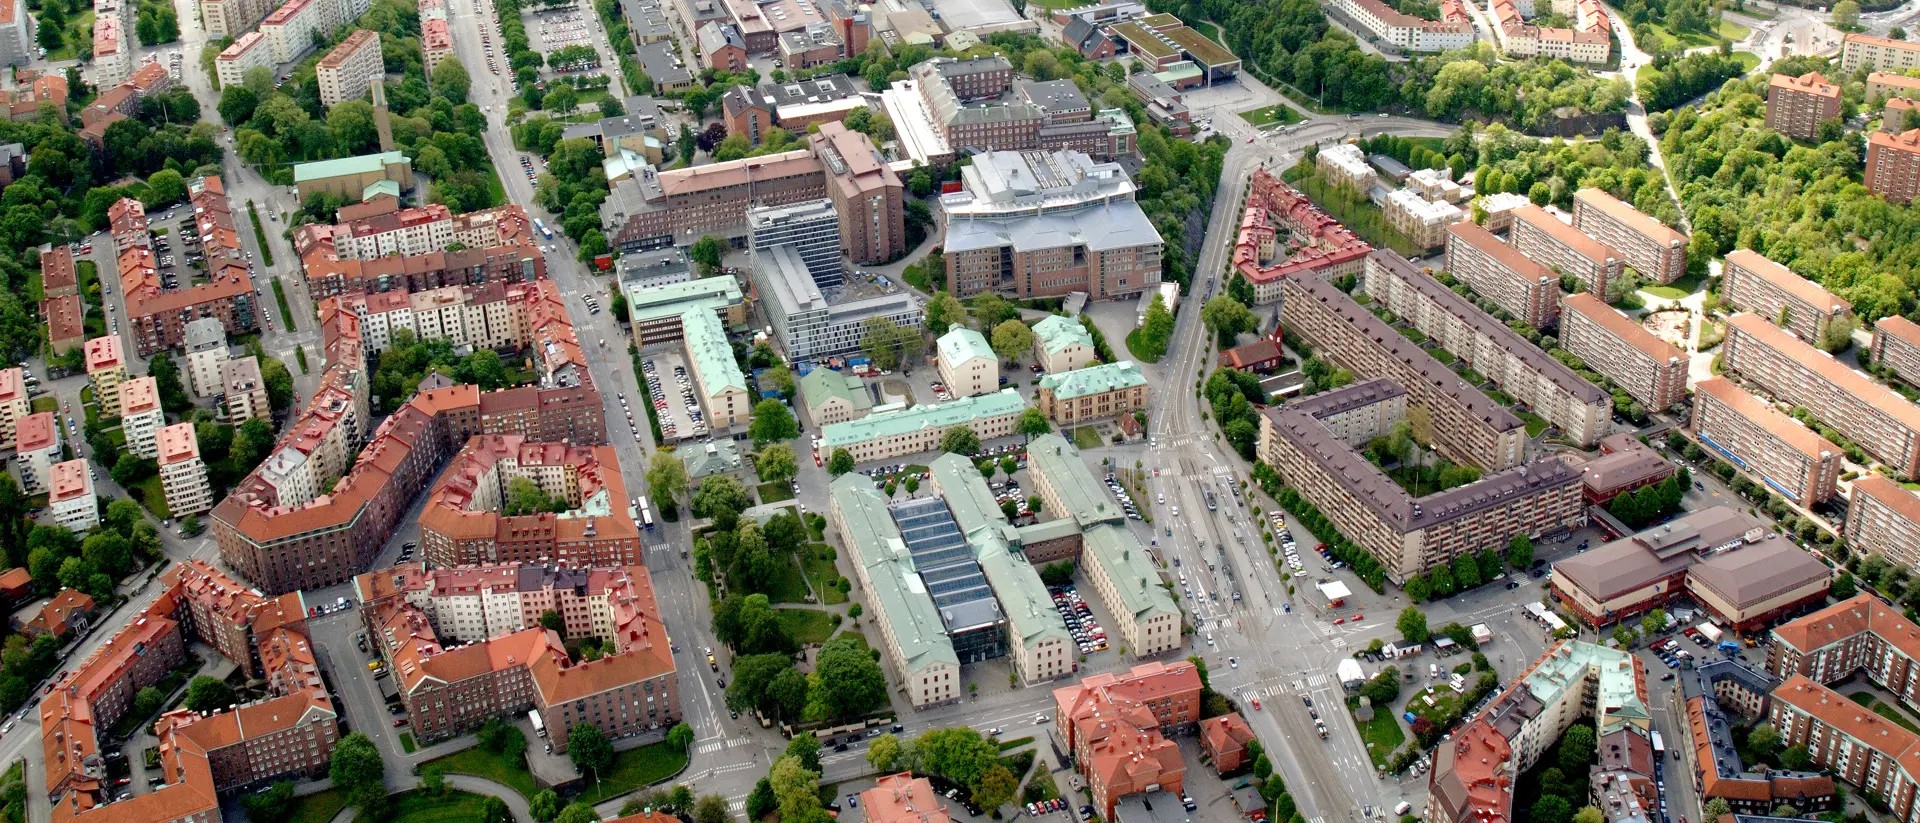 Aerial view of Campus Johanneberg